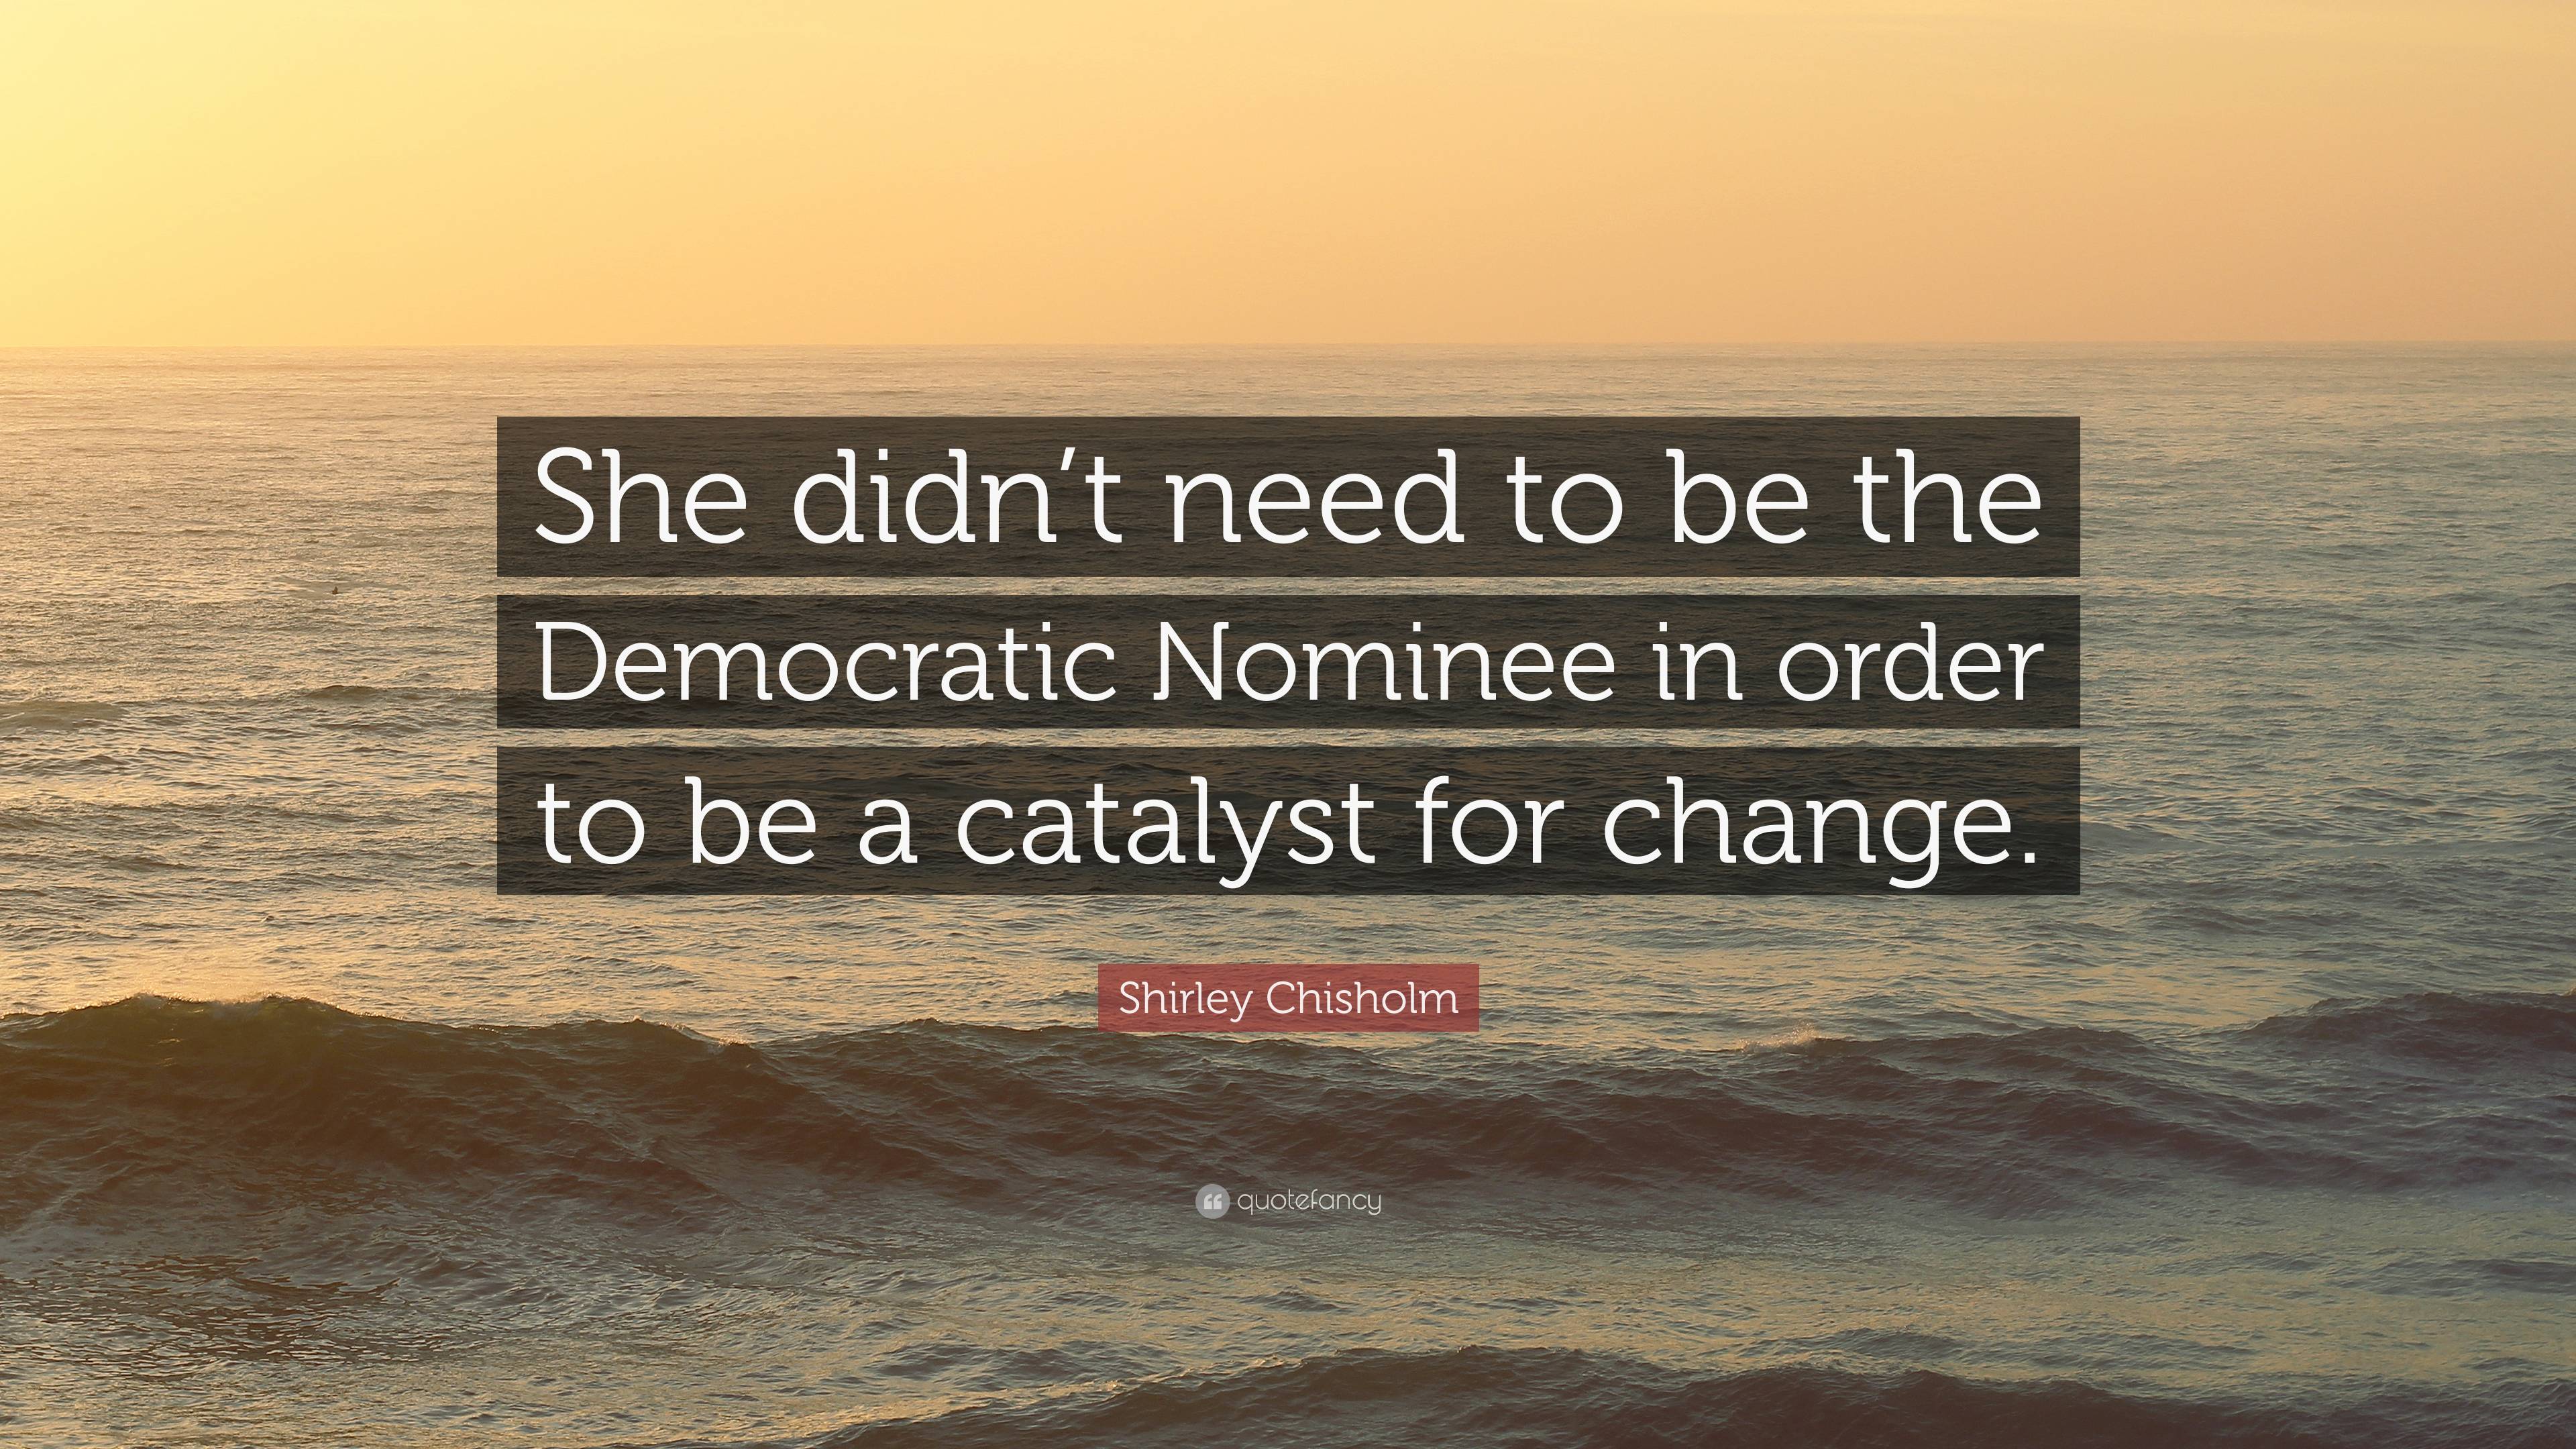 Shirley Chisholm Quote: “She didn’t need to be the Democratic Nominee ...